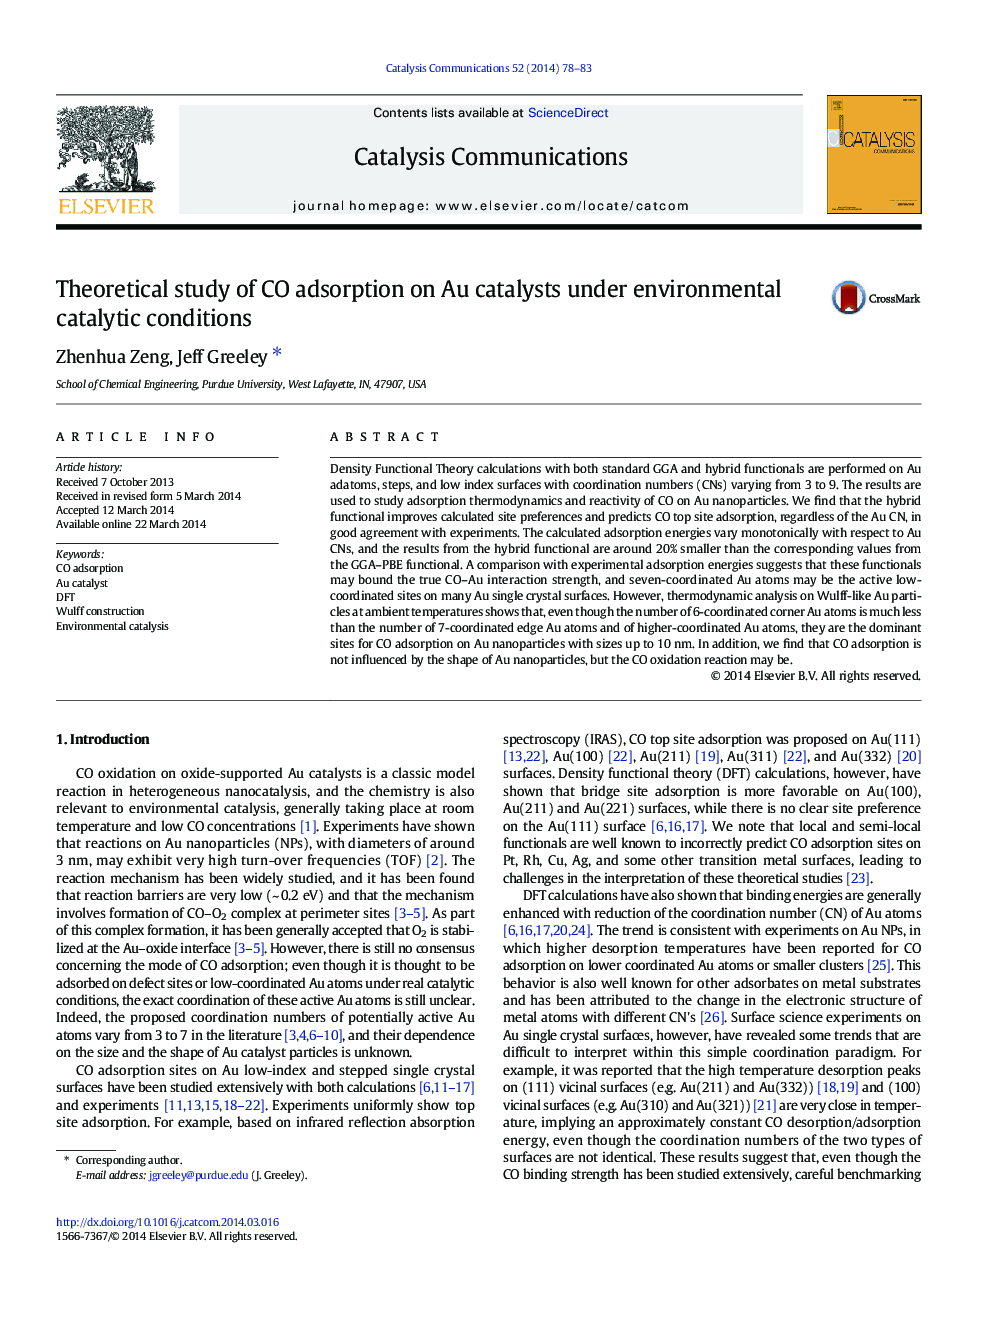 Theoretical study of CO adsorption on Au catalysts under environmental catalytic conditions